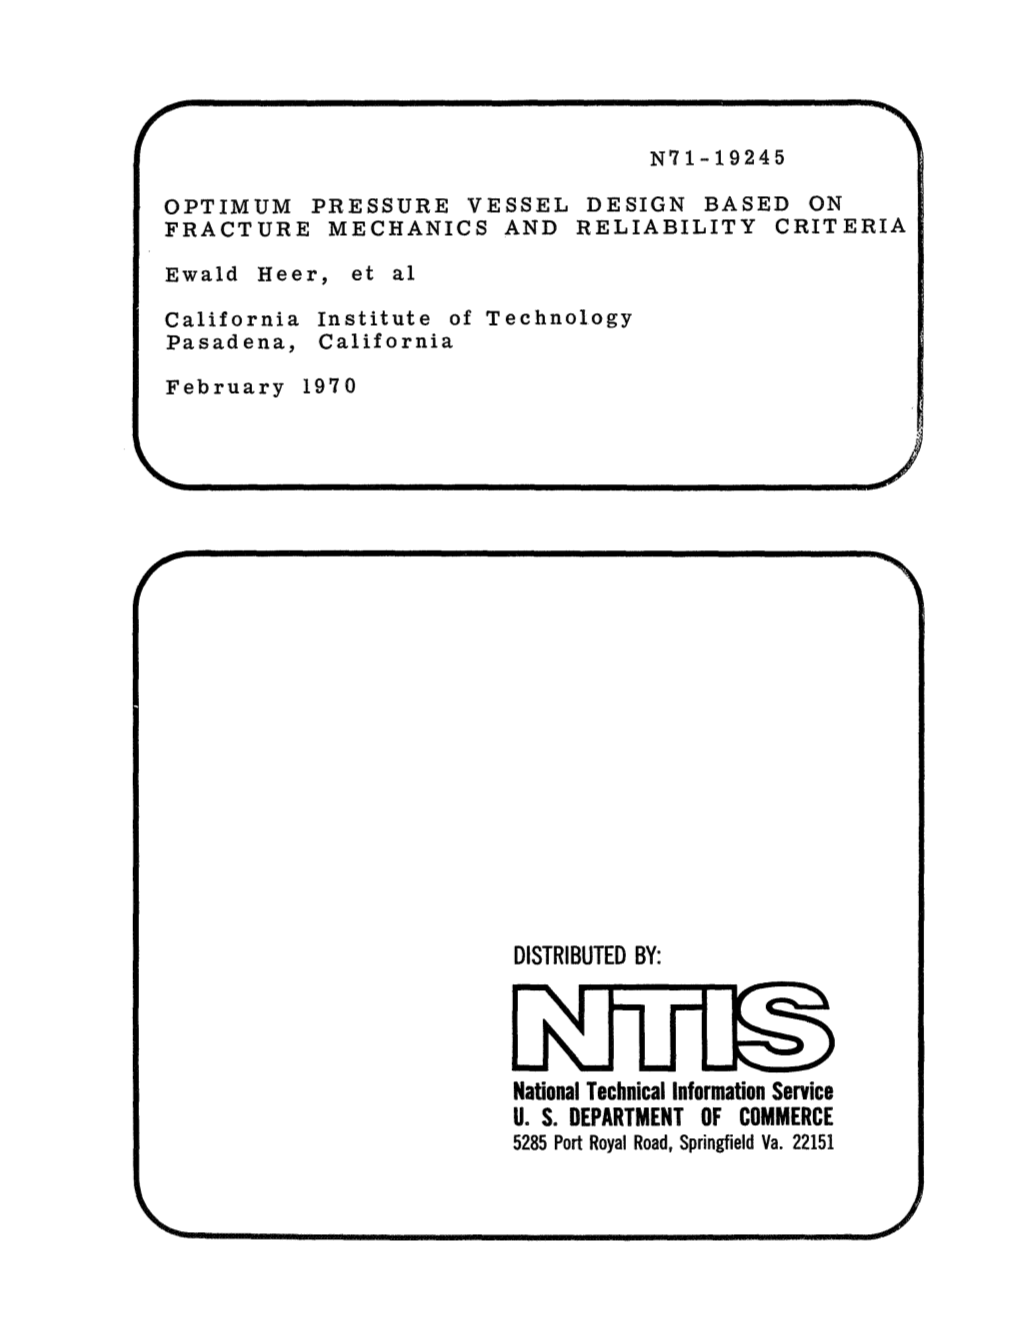 National Technical Information Service US DEPARTMENT OF